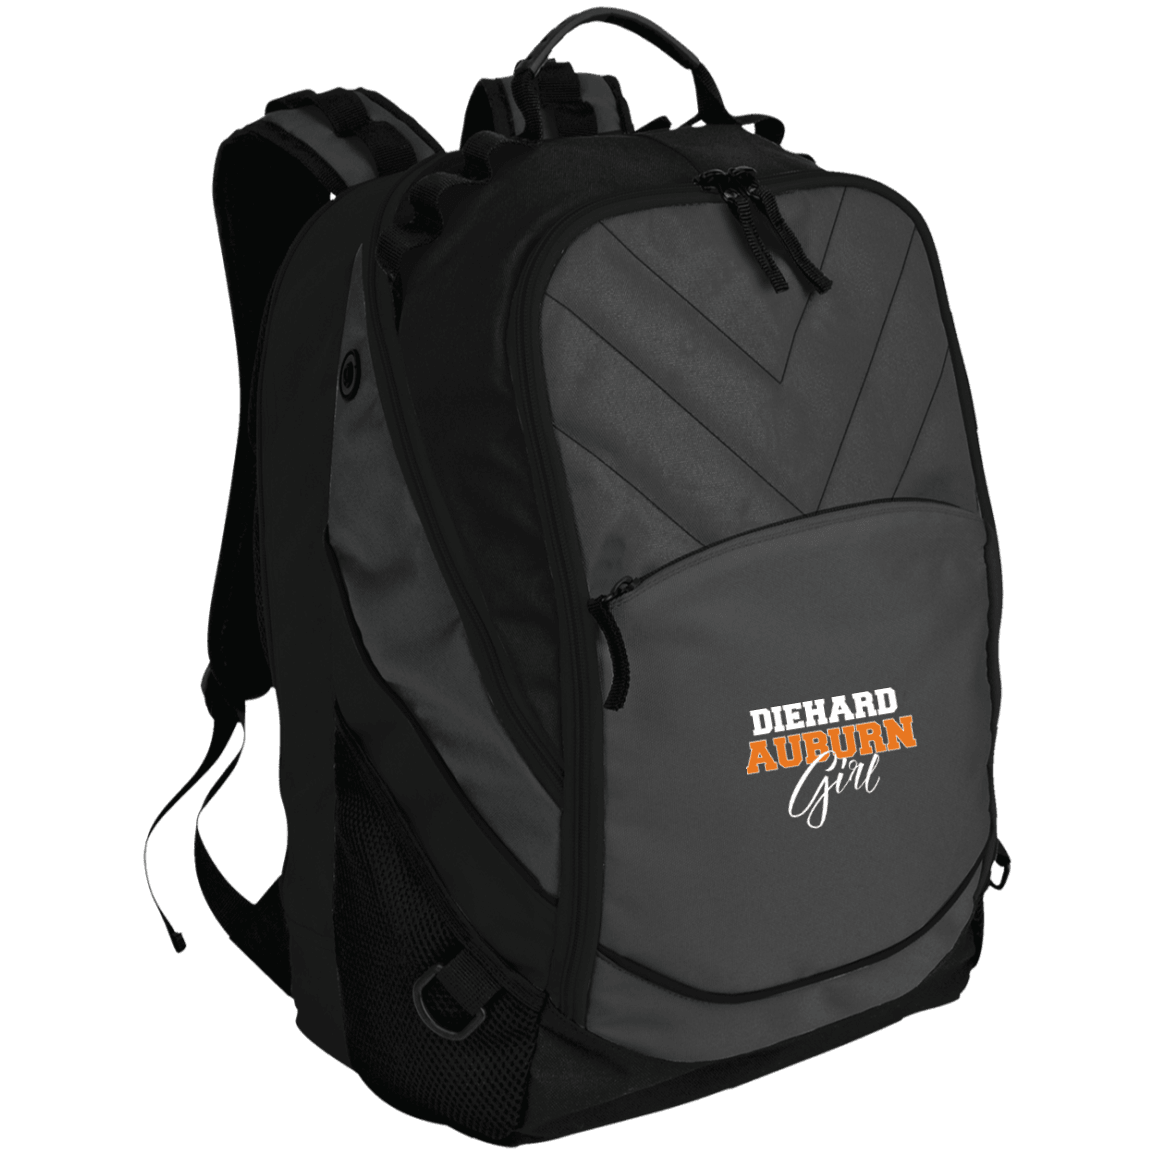 Designs by MyUtopia Shout Out:Diehard Auburn Girl Embroidered Port Authority Laptop Computer Backpack,Dark Charcoal/Black / One Size,Backpacks